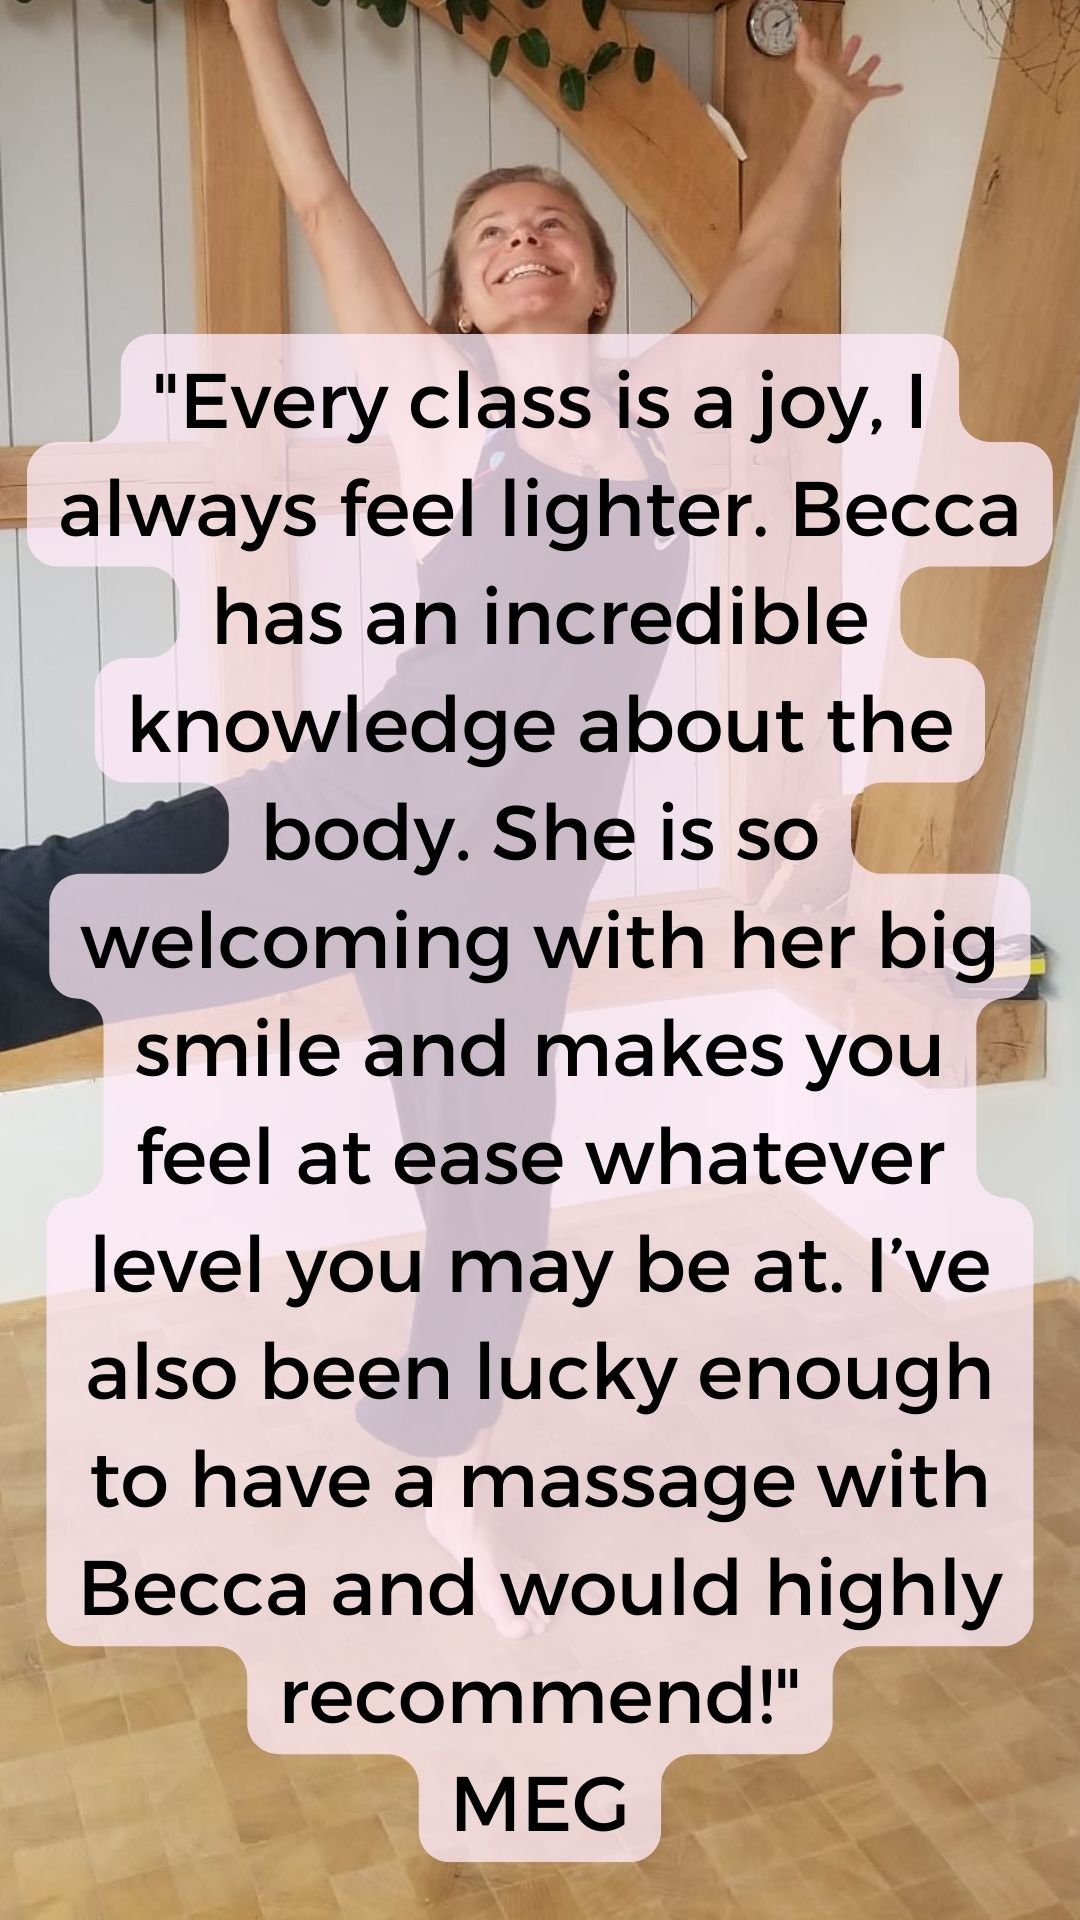 Meg quote about Becca.jpg